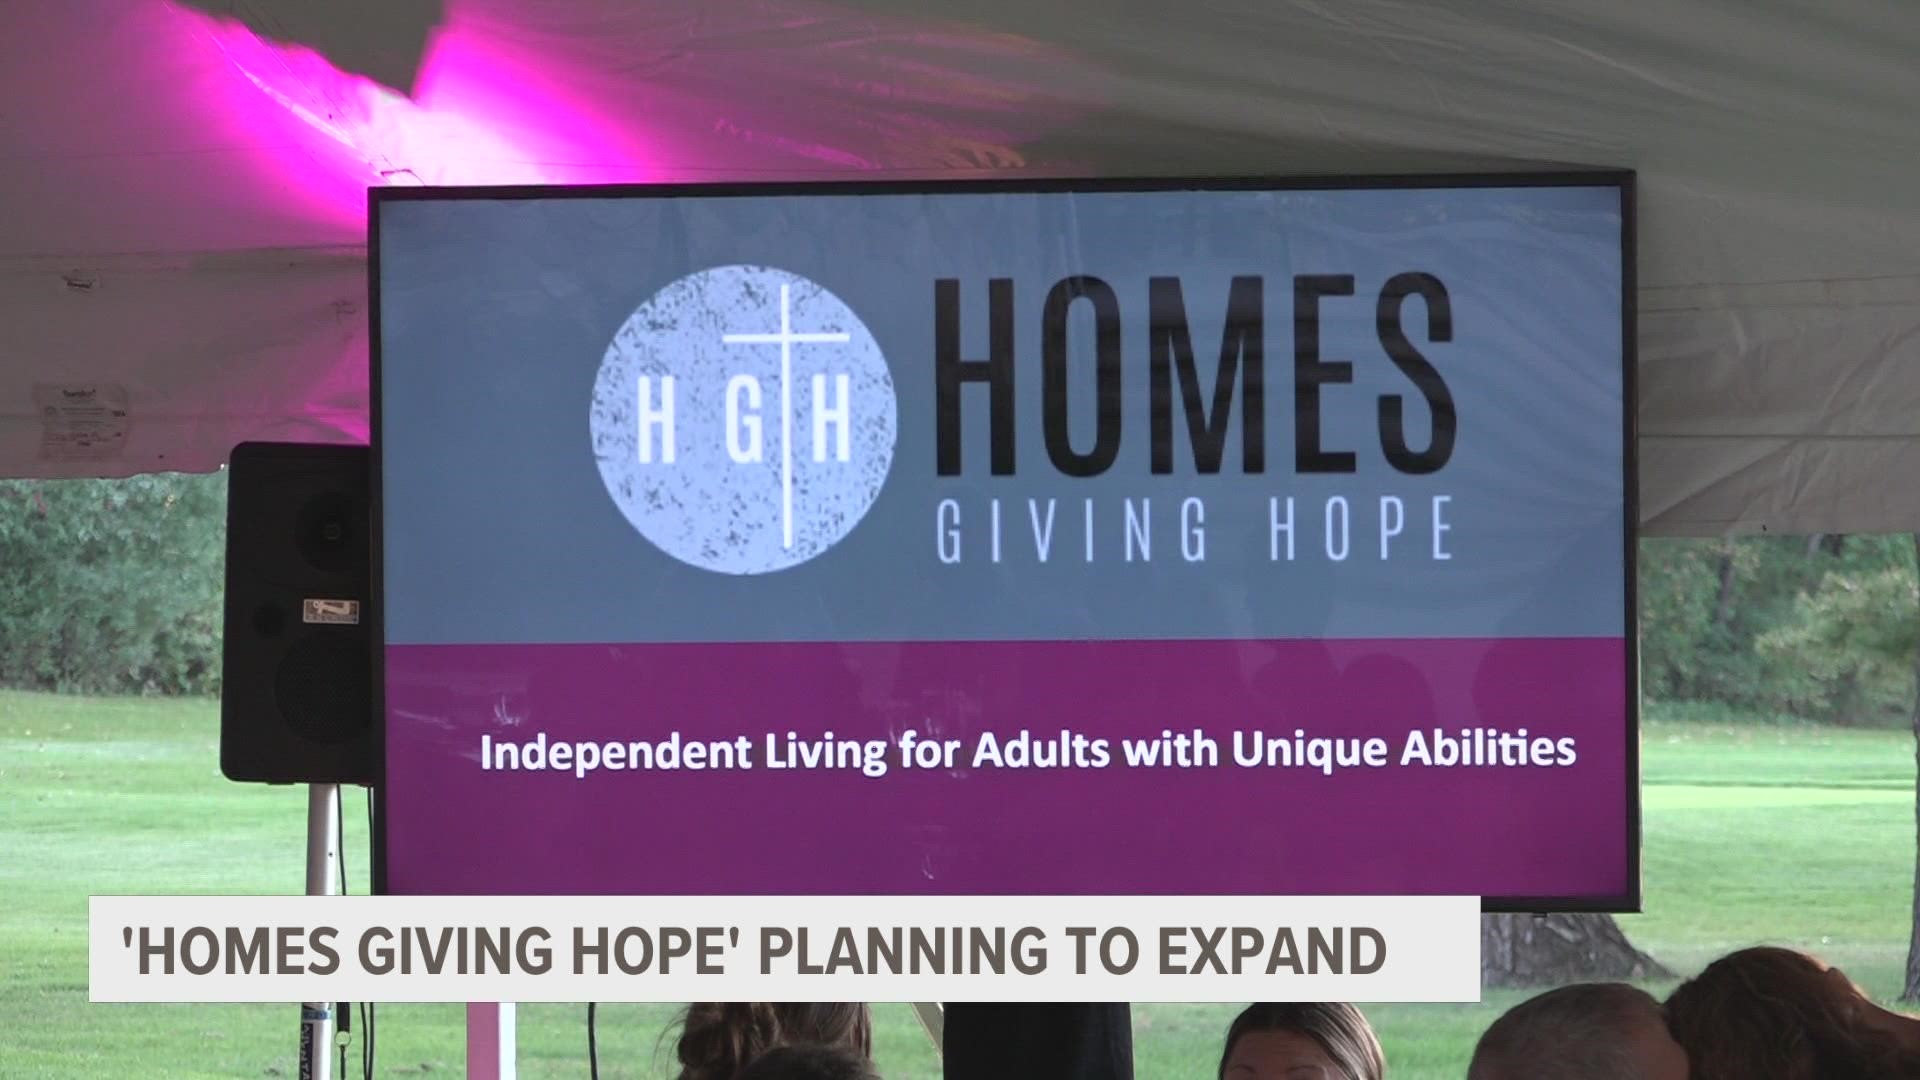 "It's pretty amazing living on my own. Don't have mom or dad around. It's more freedom. You learn to do stuff on your own," said a Homes Giving Hope resident.